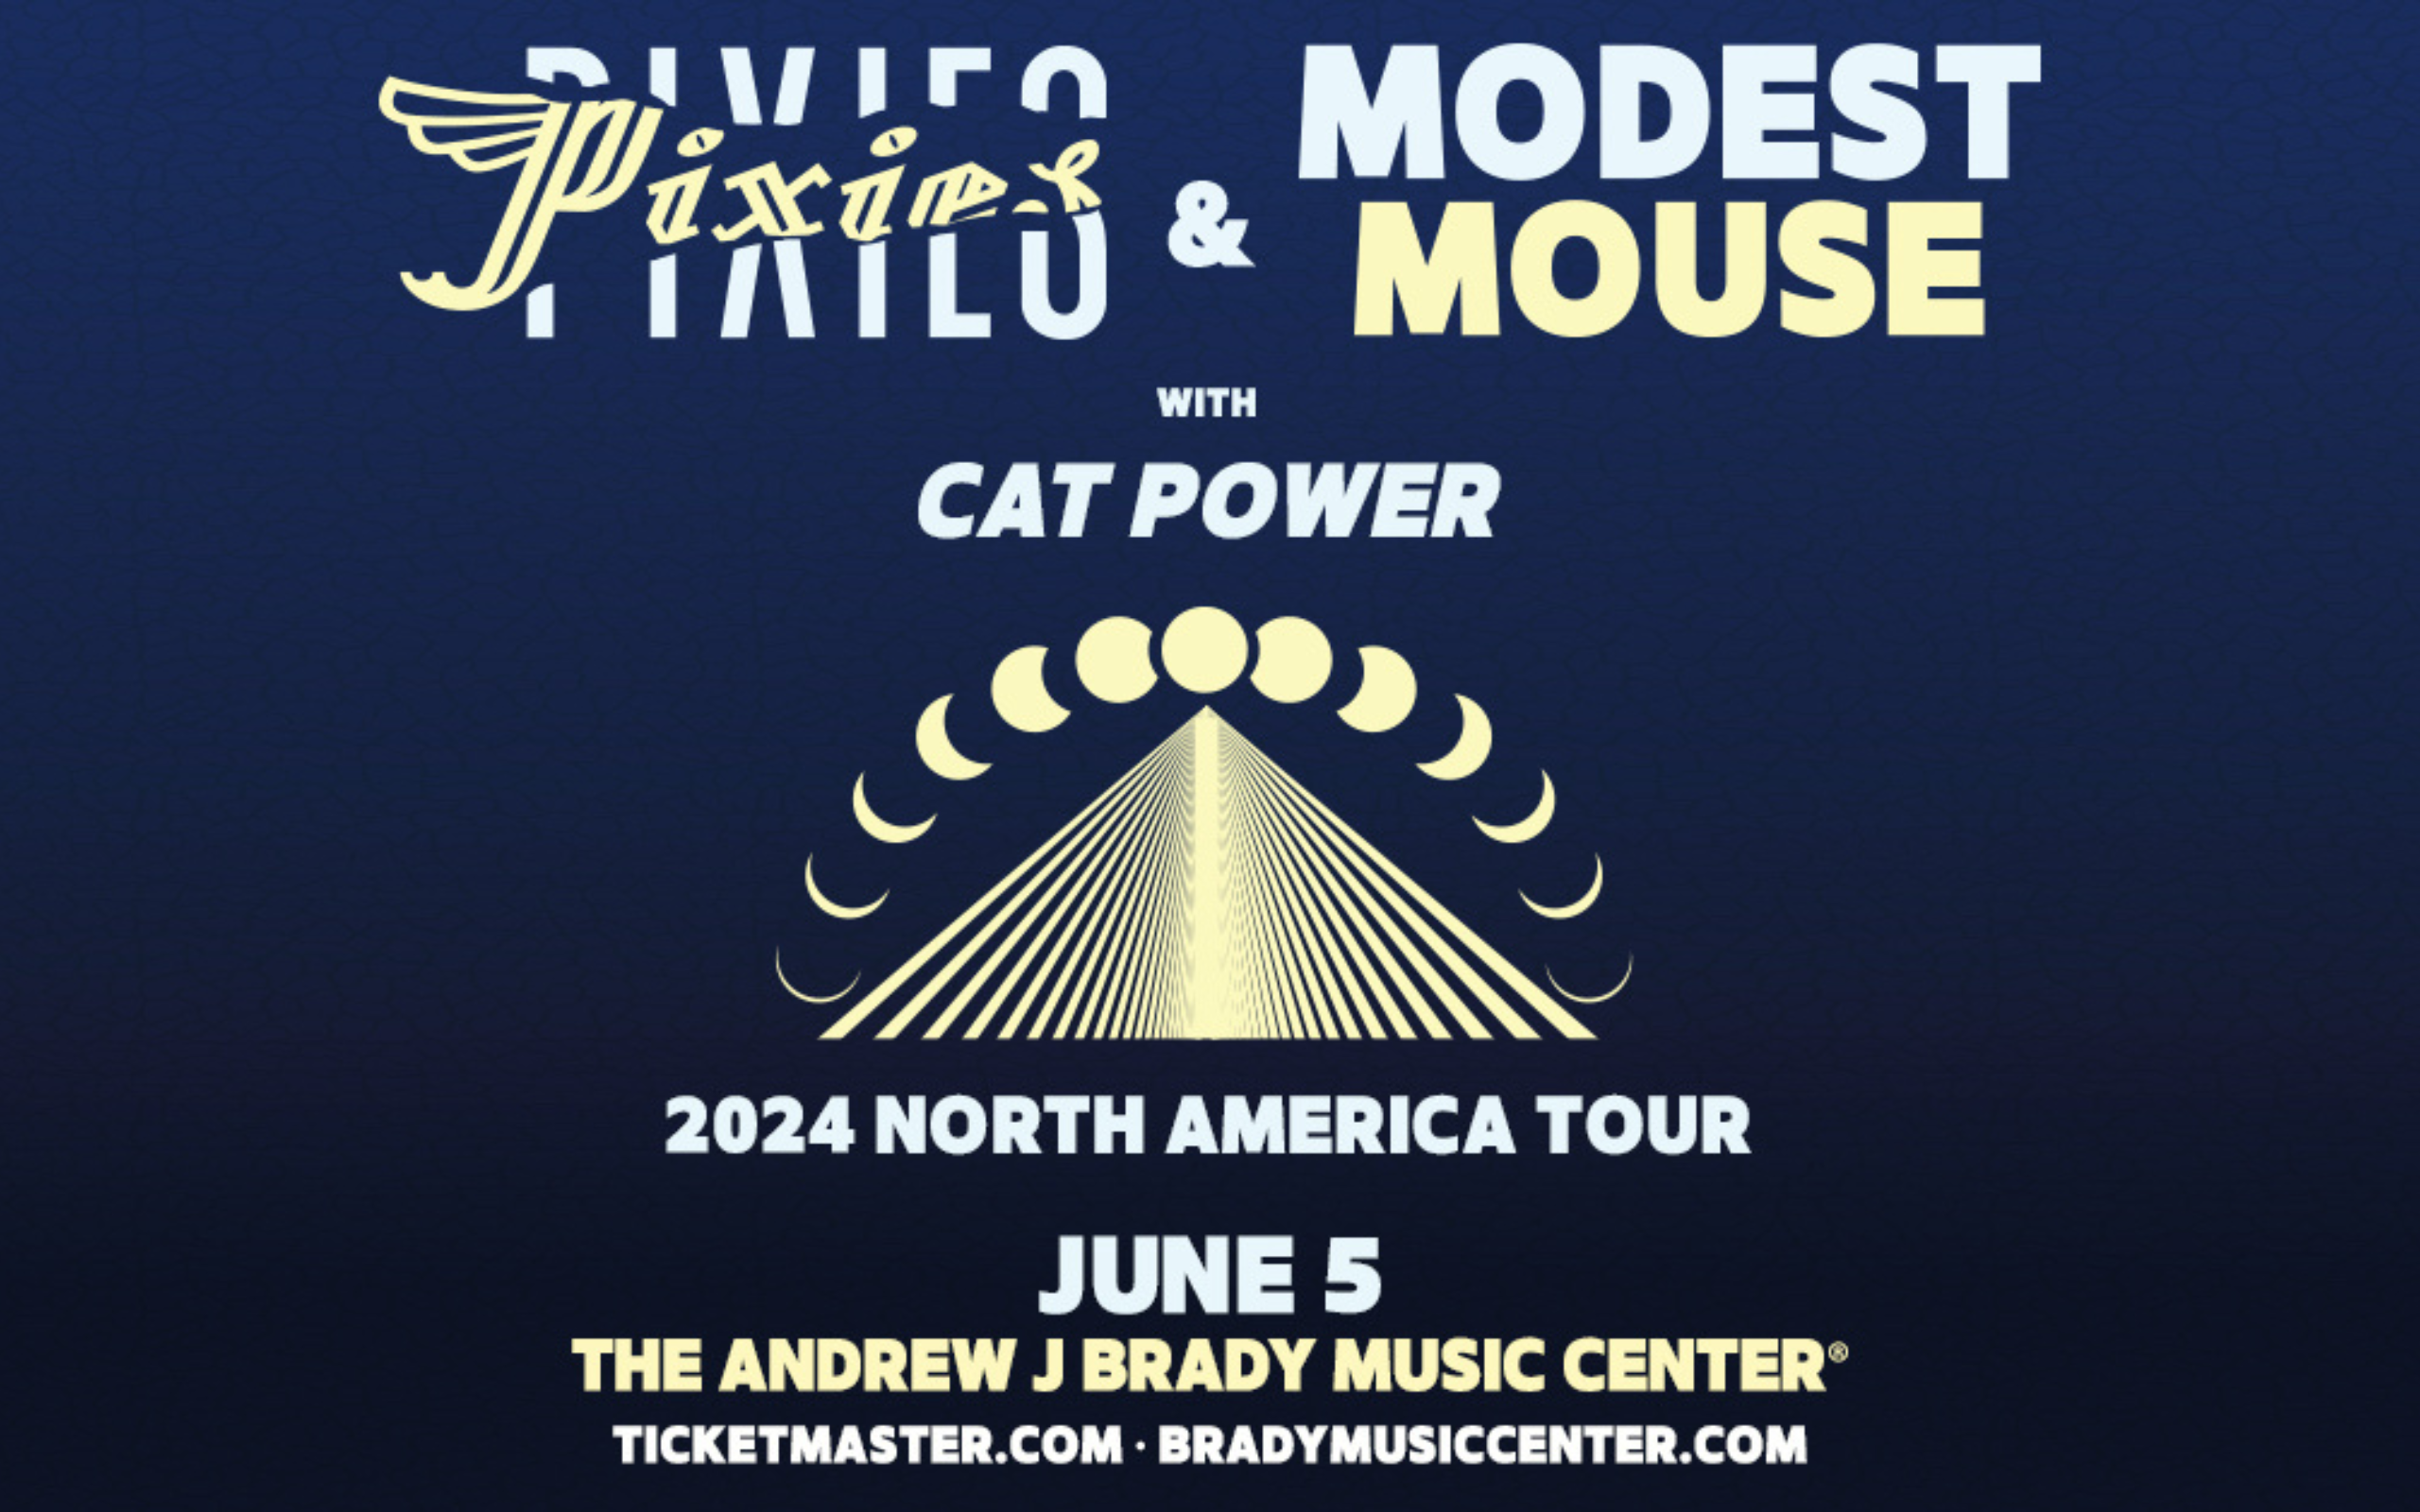 <h1 class="tribe-events-single-event-title">PIXIES & Modest Mouse @ The Andrew J Brady Music Center</h1>